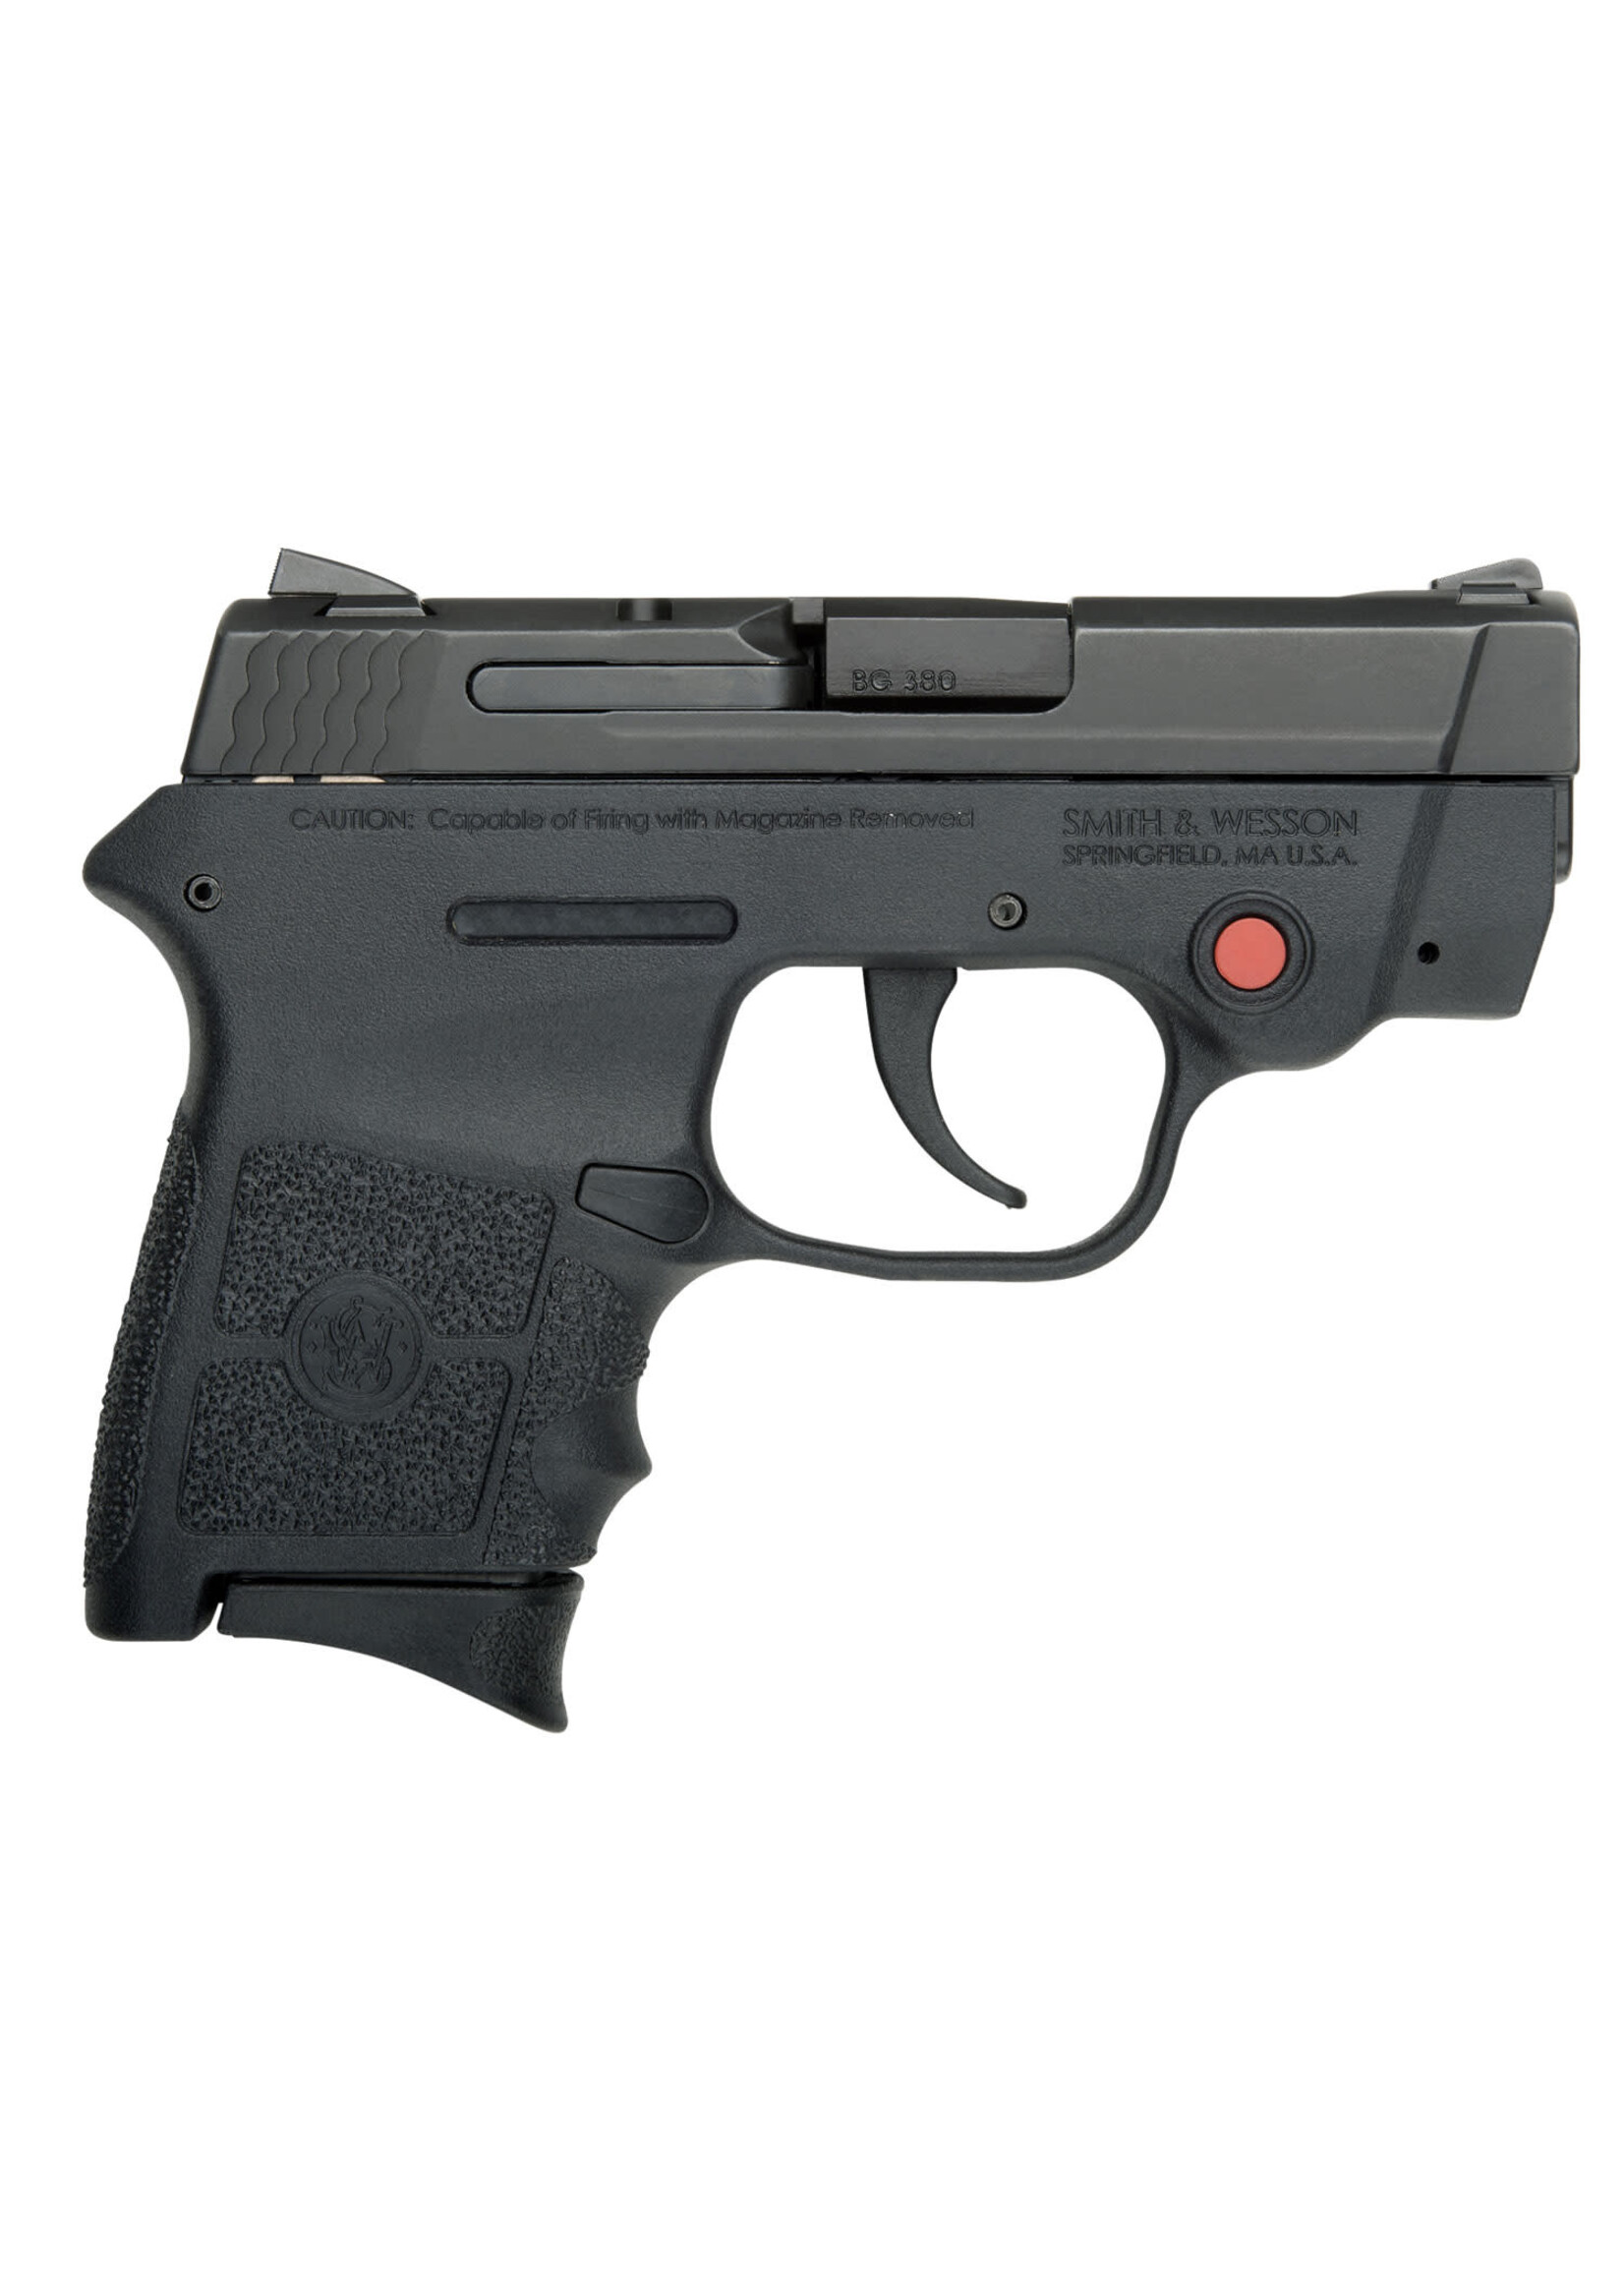 Smith and Wesson (S&W) Smith & Wesson 10048 M&P Bodyguard w/CT Laser Micro-Compact Frame 380 ACP 6+1, 2.75" Black Stainless Steel Barrel, Black Armornite Serrated Stainless Steel Slide, Matte Black Polymer Frame & Finger Grooved Grip, Ambidextrous